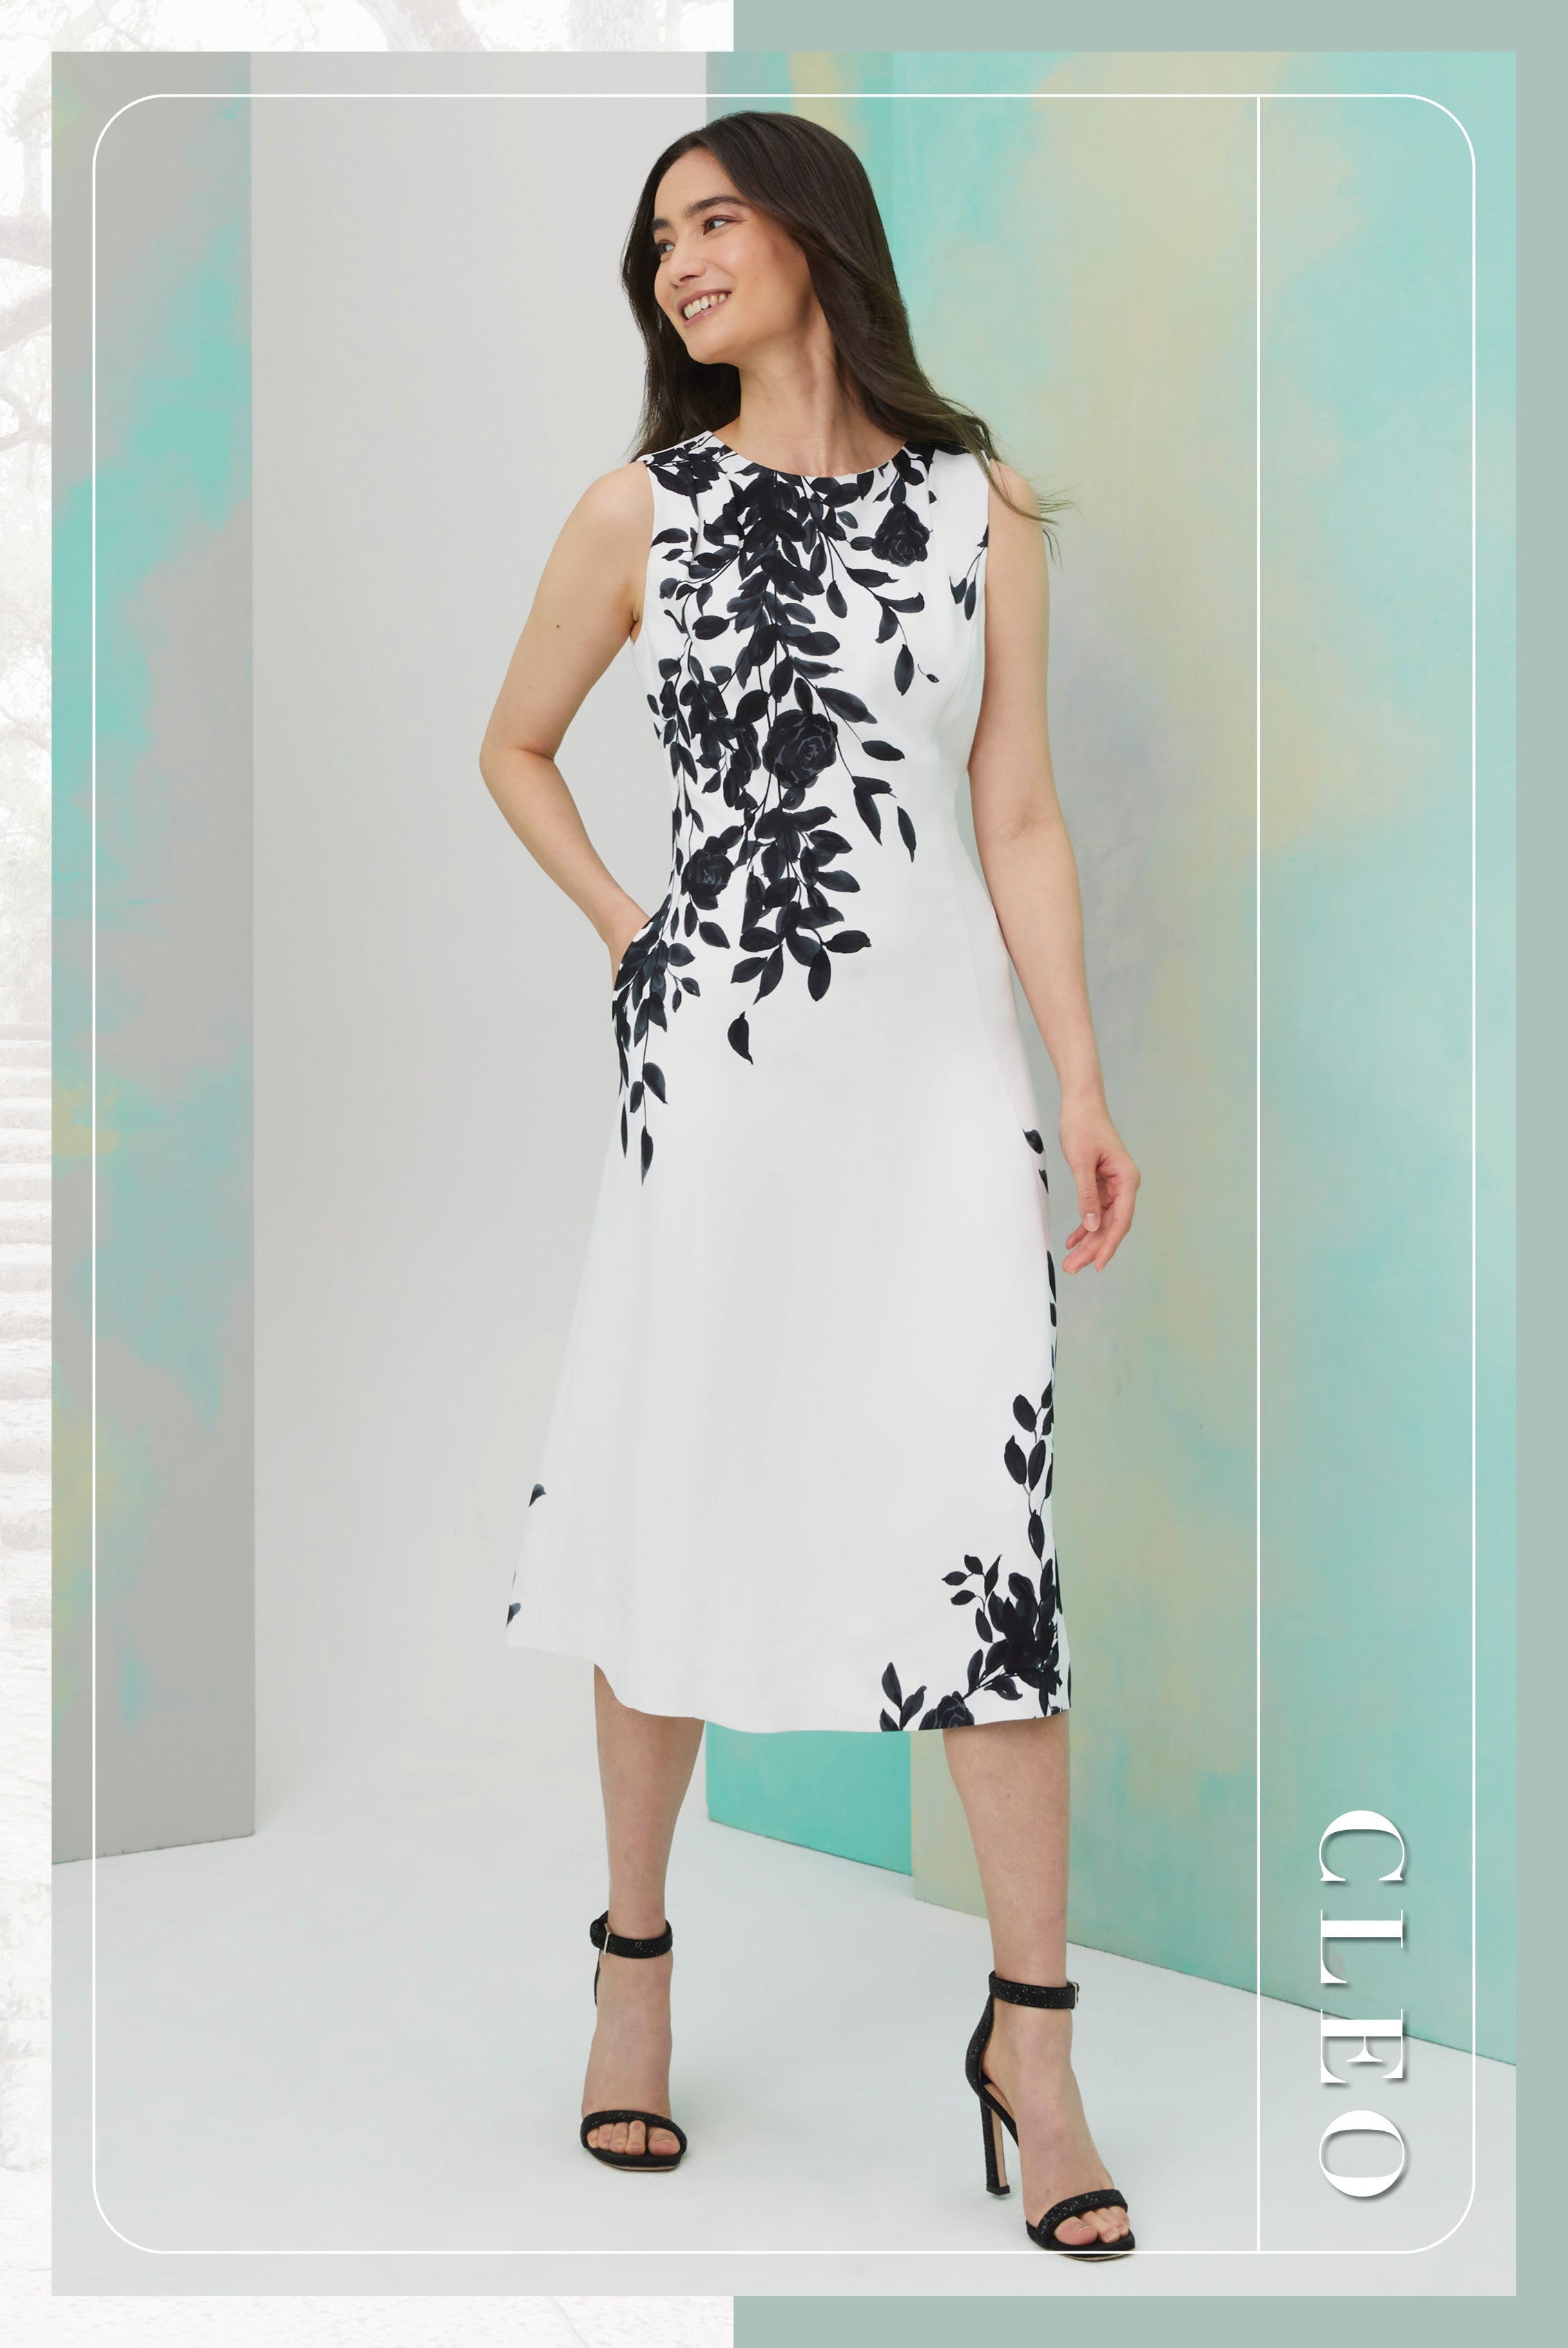 Photo of a model wearing the Cleo dress, a floral print white crêpe dress.